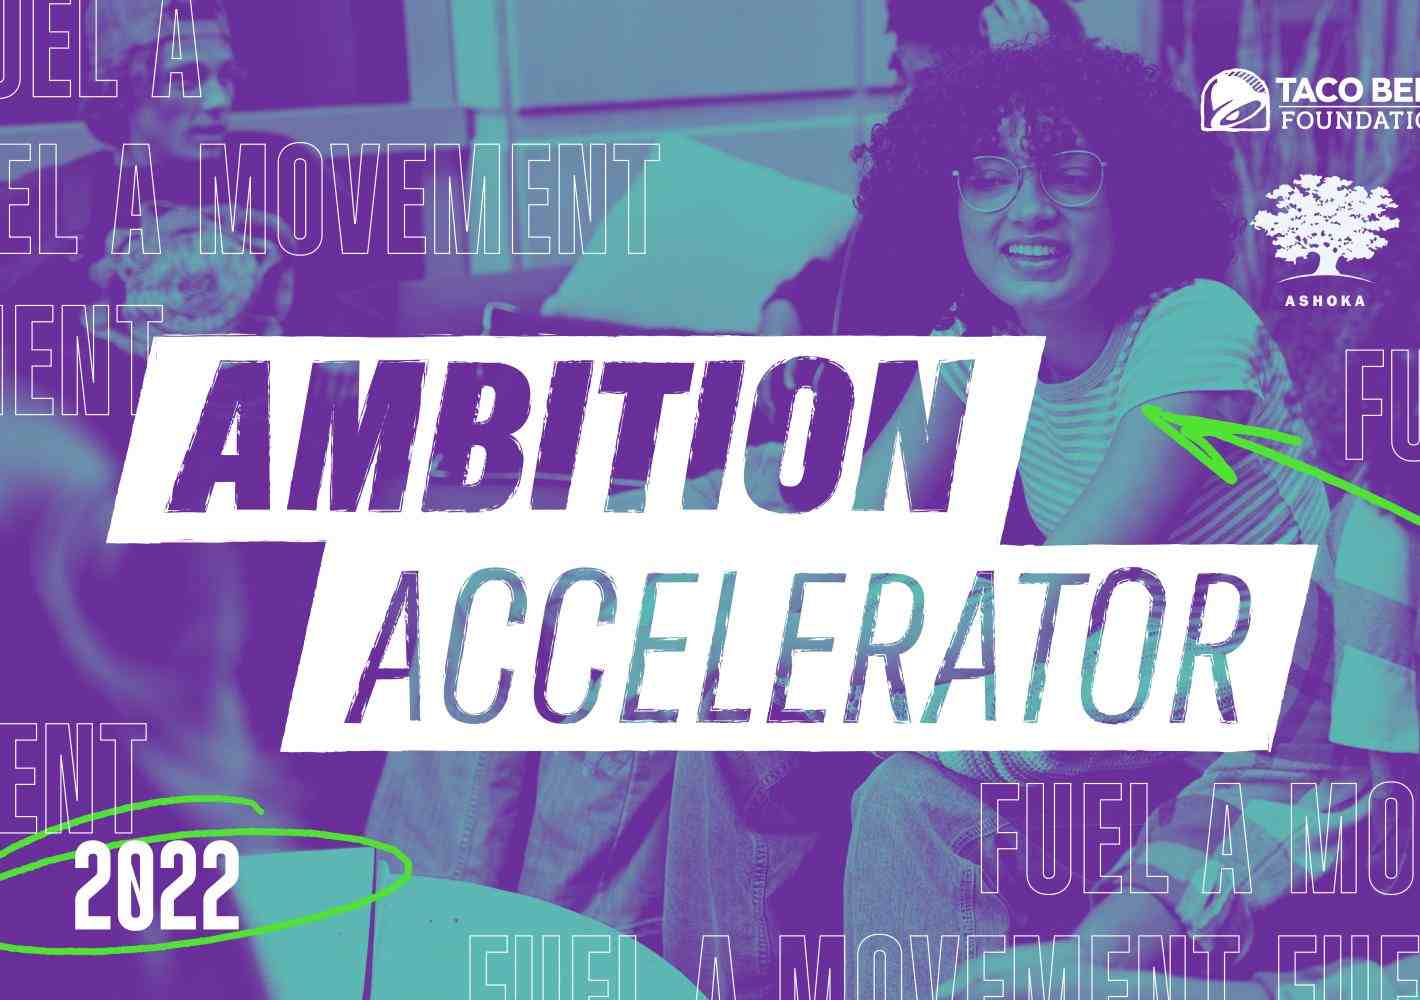 Photo shaded in purple of people talking together in a circle. In the foreground the words "AMBITION ACCELERATOR"; In upper hand corner, logo and text for Taco Bell Foundation and Ashoka. In lower left corner, text saying 2022 with a light green circle around it